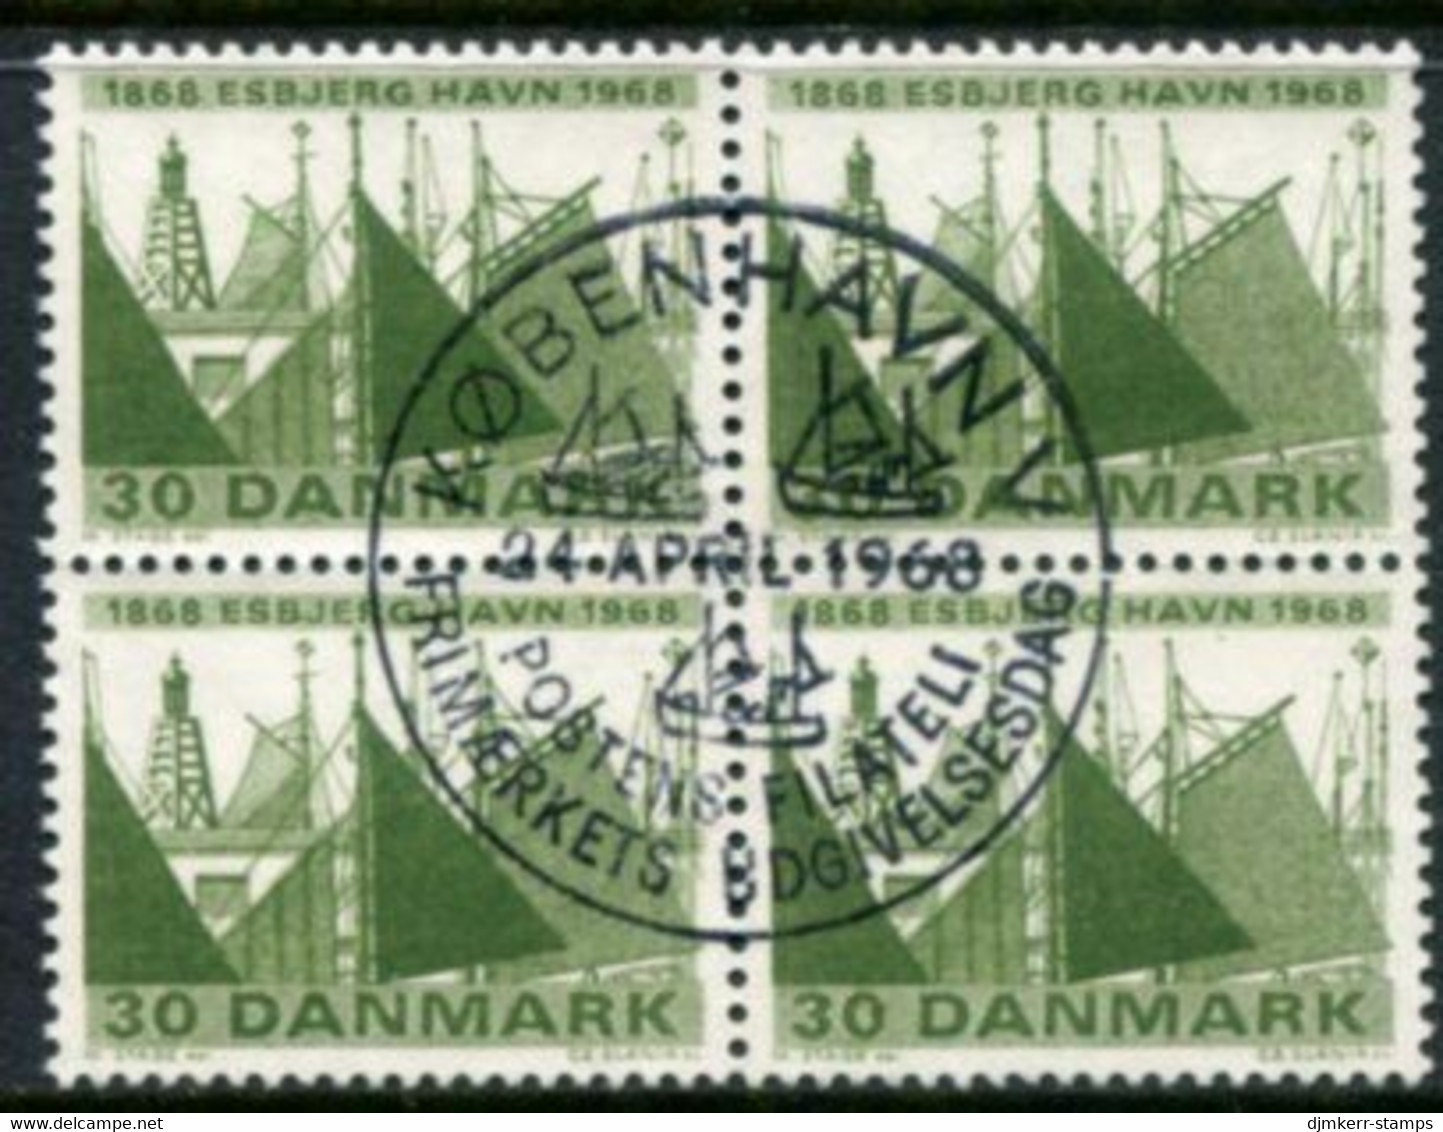 DENMARK 1968 Esbjerg Harbour Centenary Block Of 4 Used   Michel 467 - Used Stamps